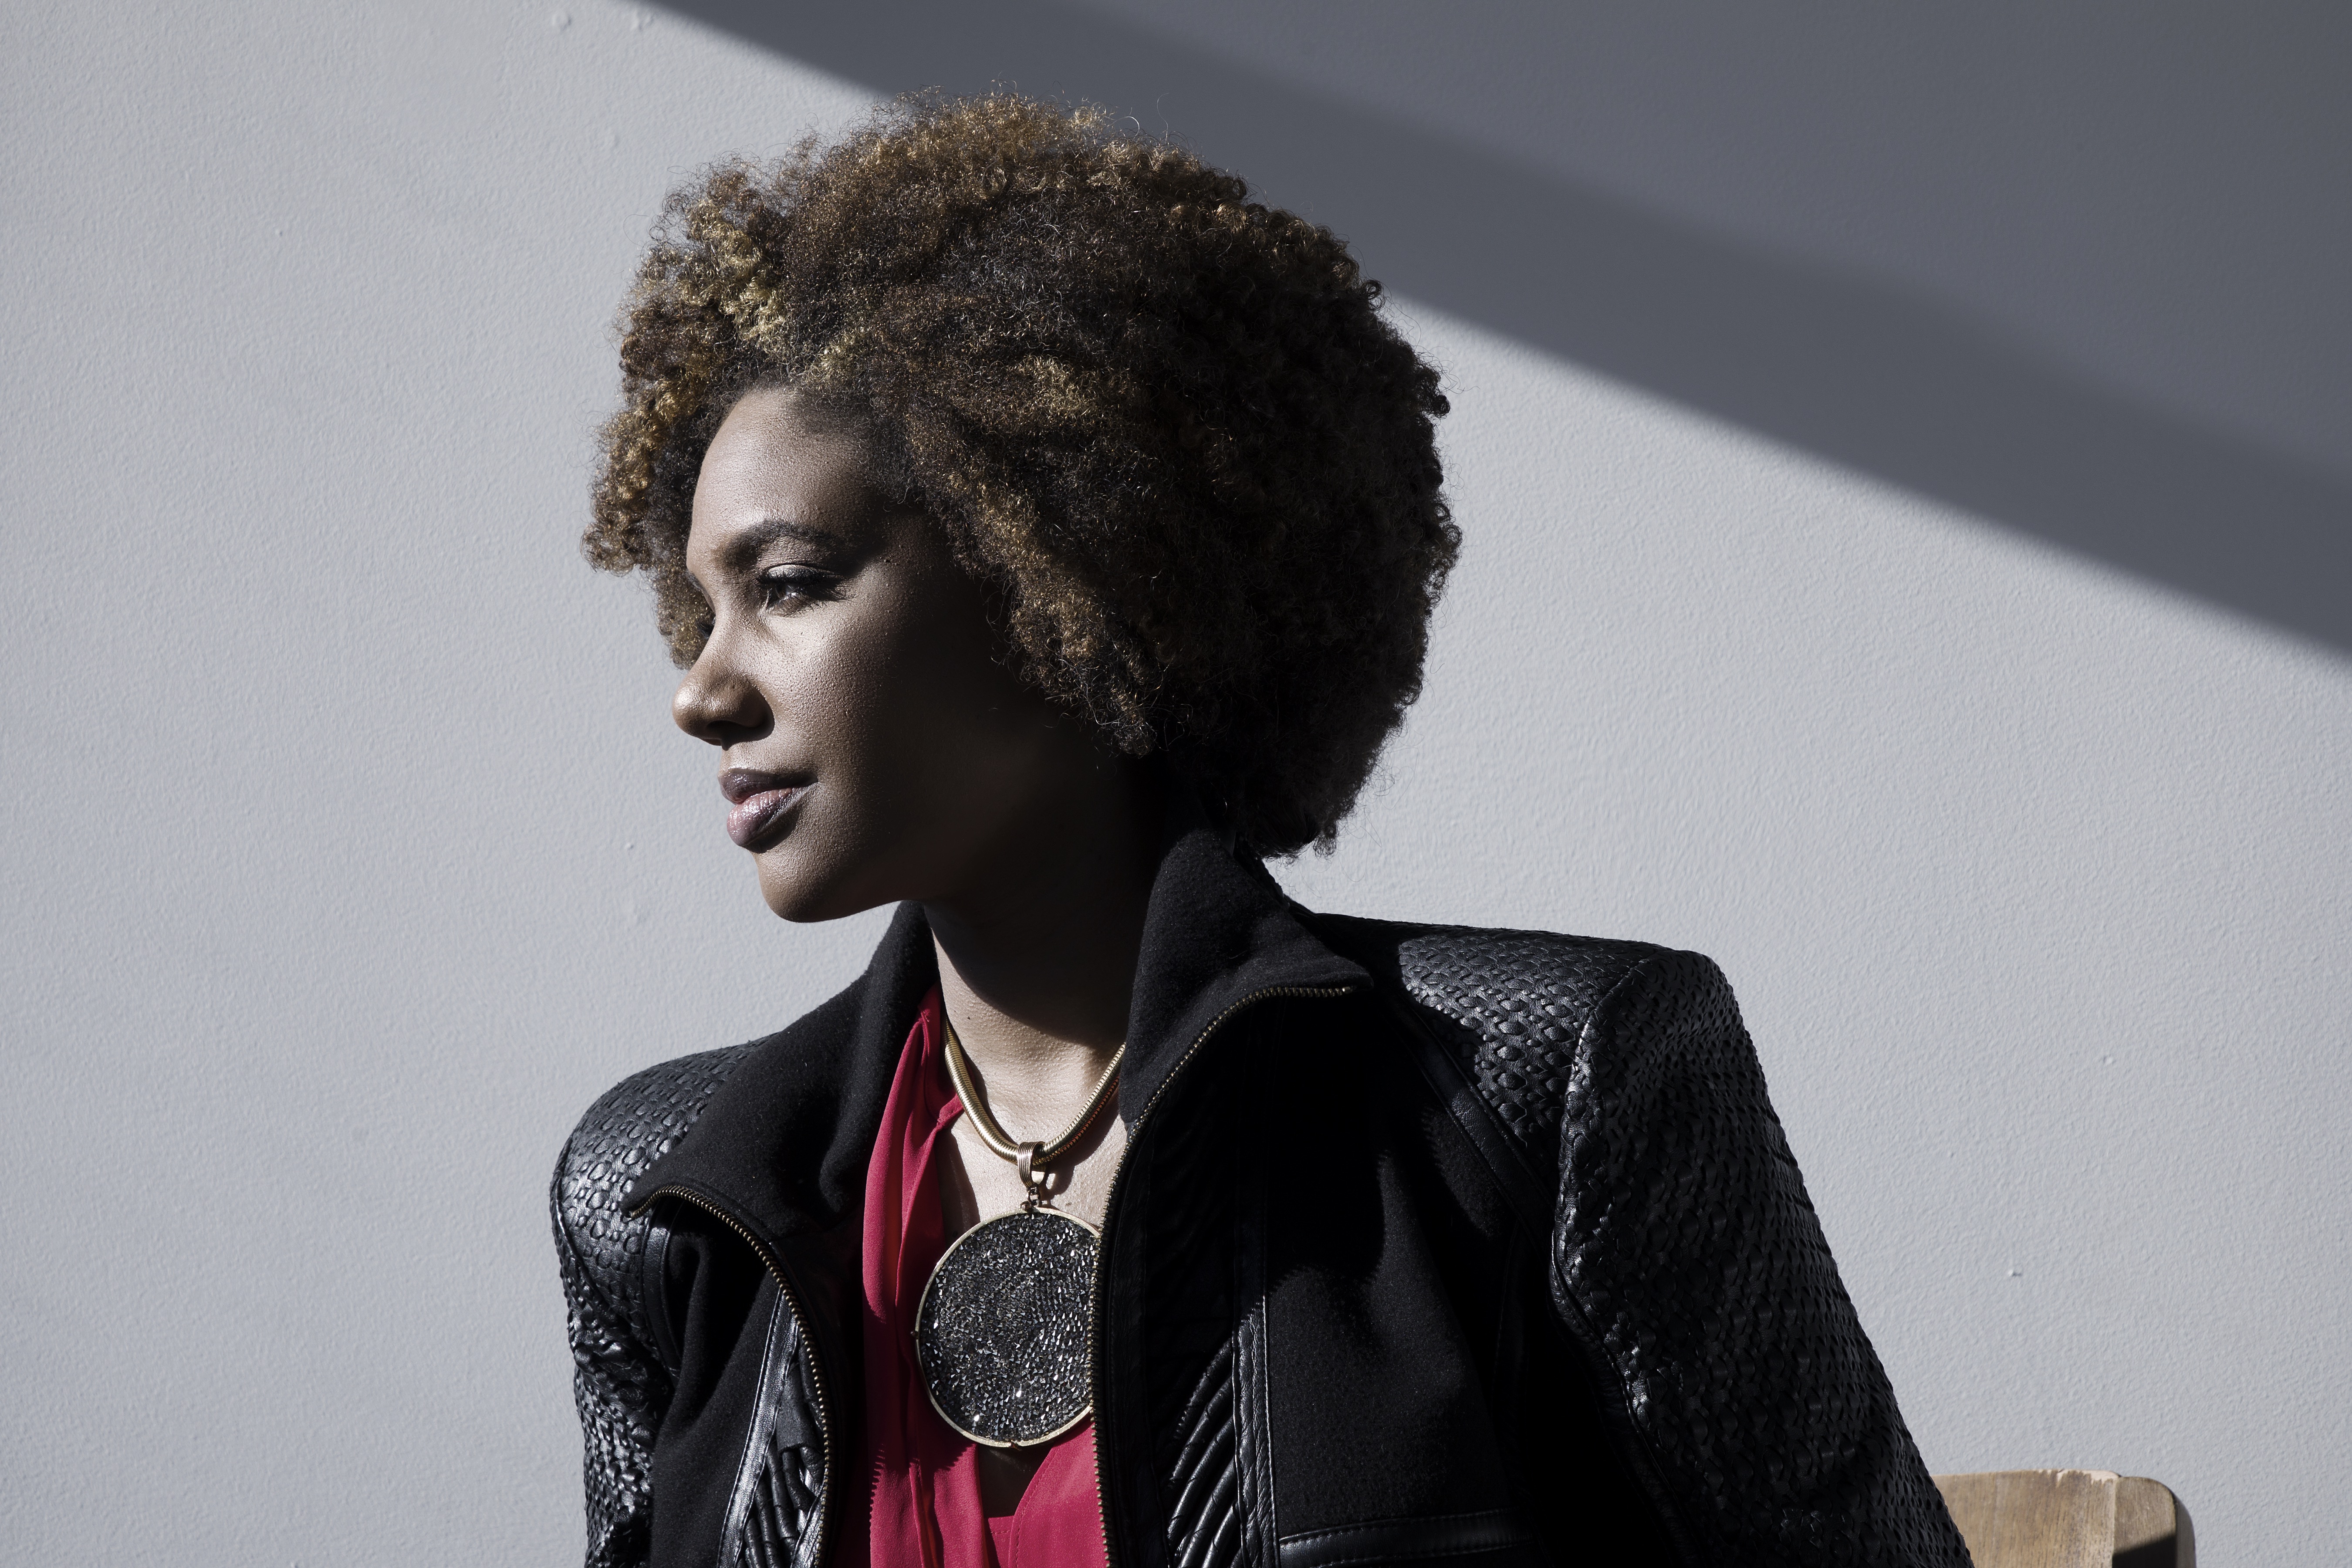  Profile shot of LaToya Ruby Fraizer against a gray background and dramatic lighting. She sports a mid-brown afro, a black blazer with a hot pink blouse, and a bronze necklace with a large round medallion. She gazes off frame with a faint hint of a smile on her face. 